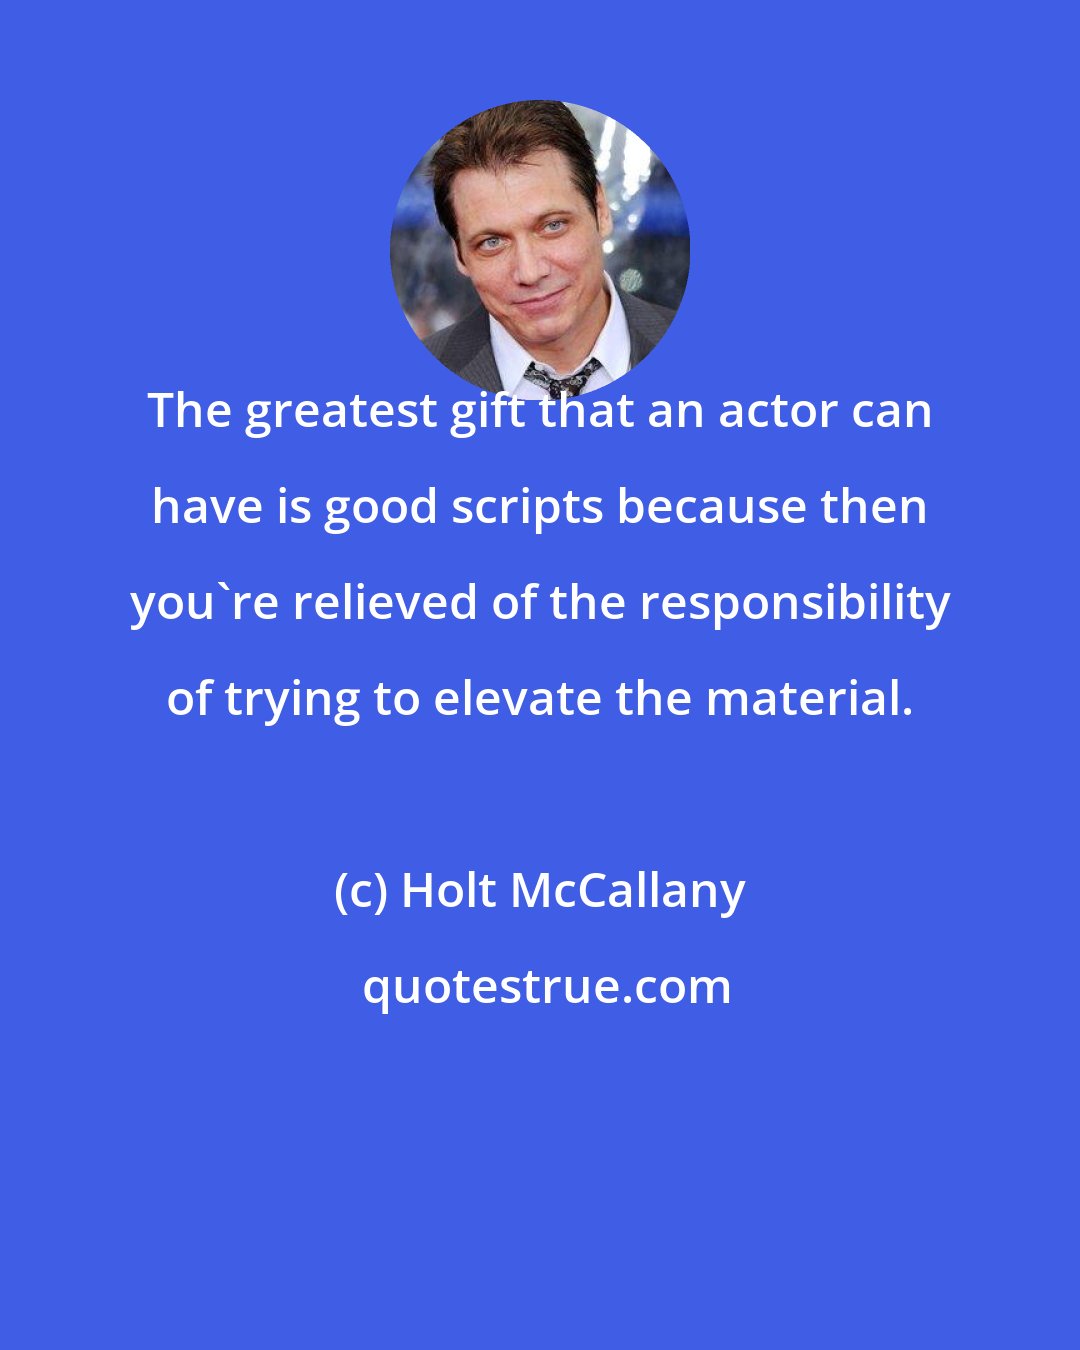 Holt McCallany: The greatest gift that an actor can have is good scripts because then you're relieved of the responsibility of trying to elevate the material.